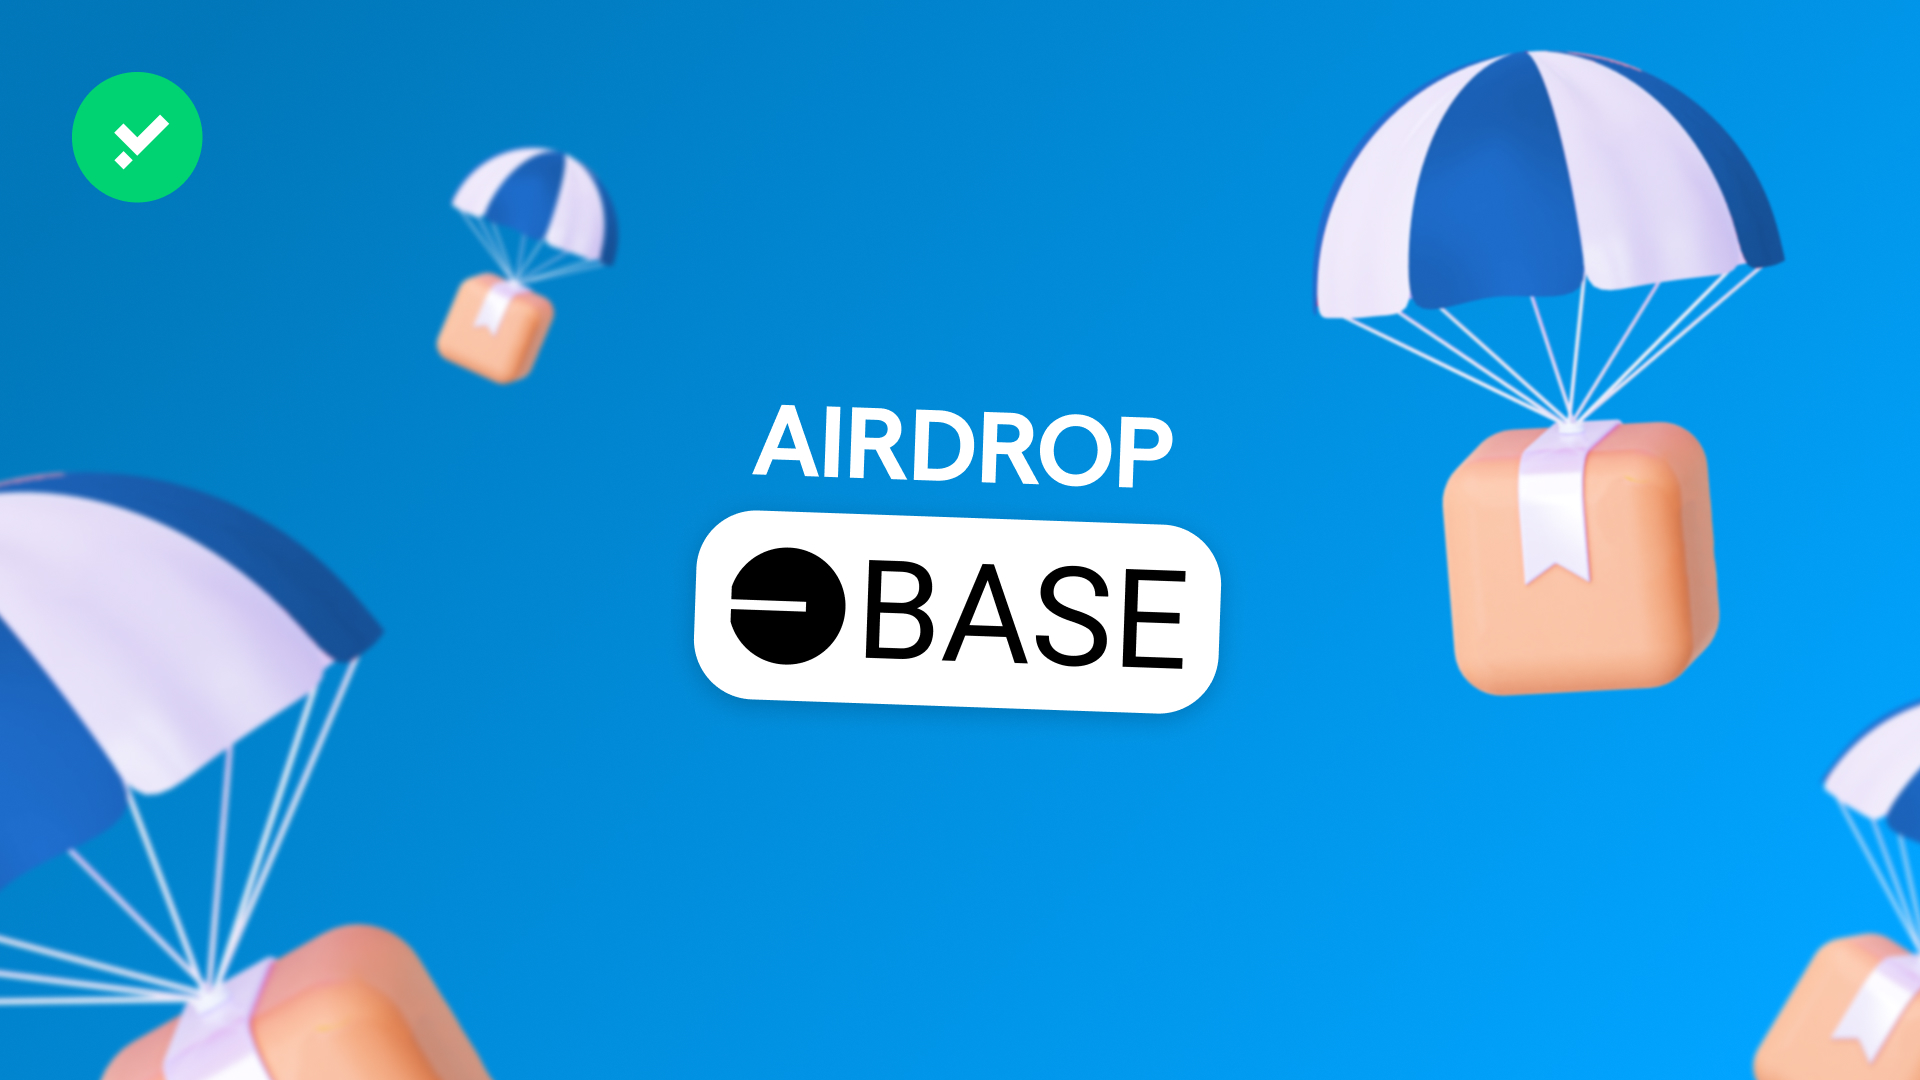 The ultimate guide to Base airdrop